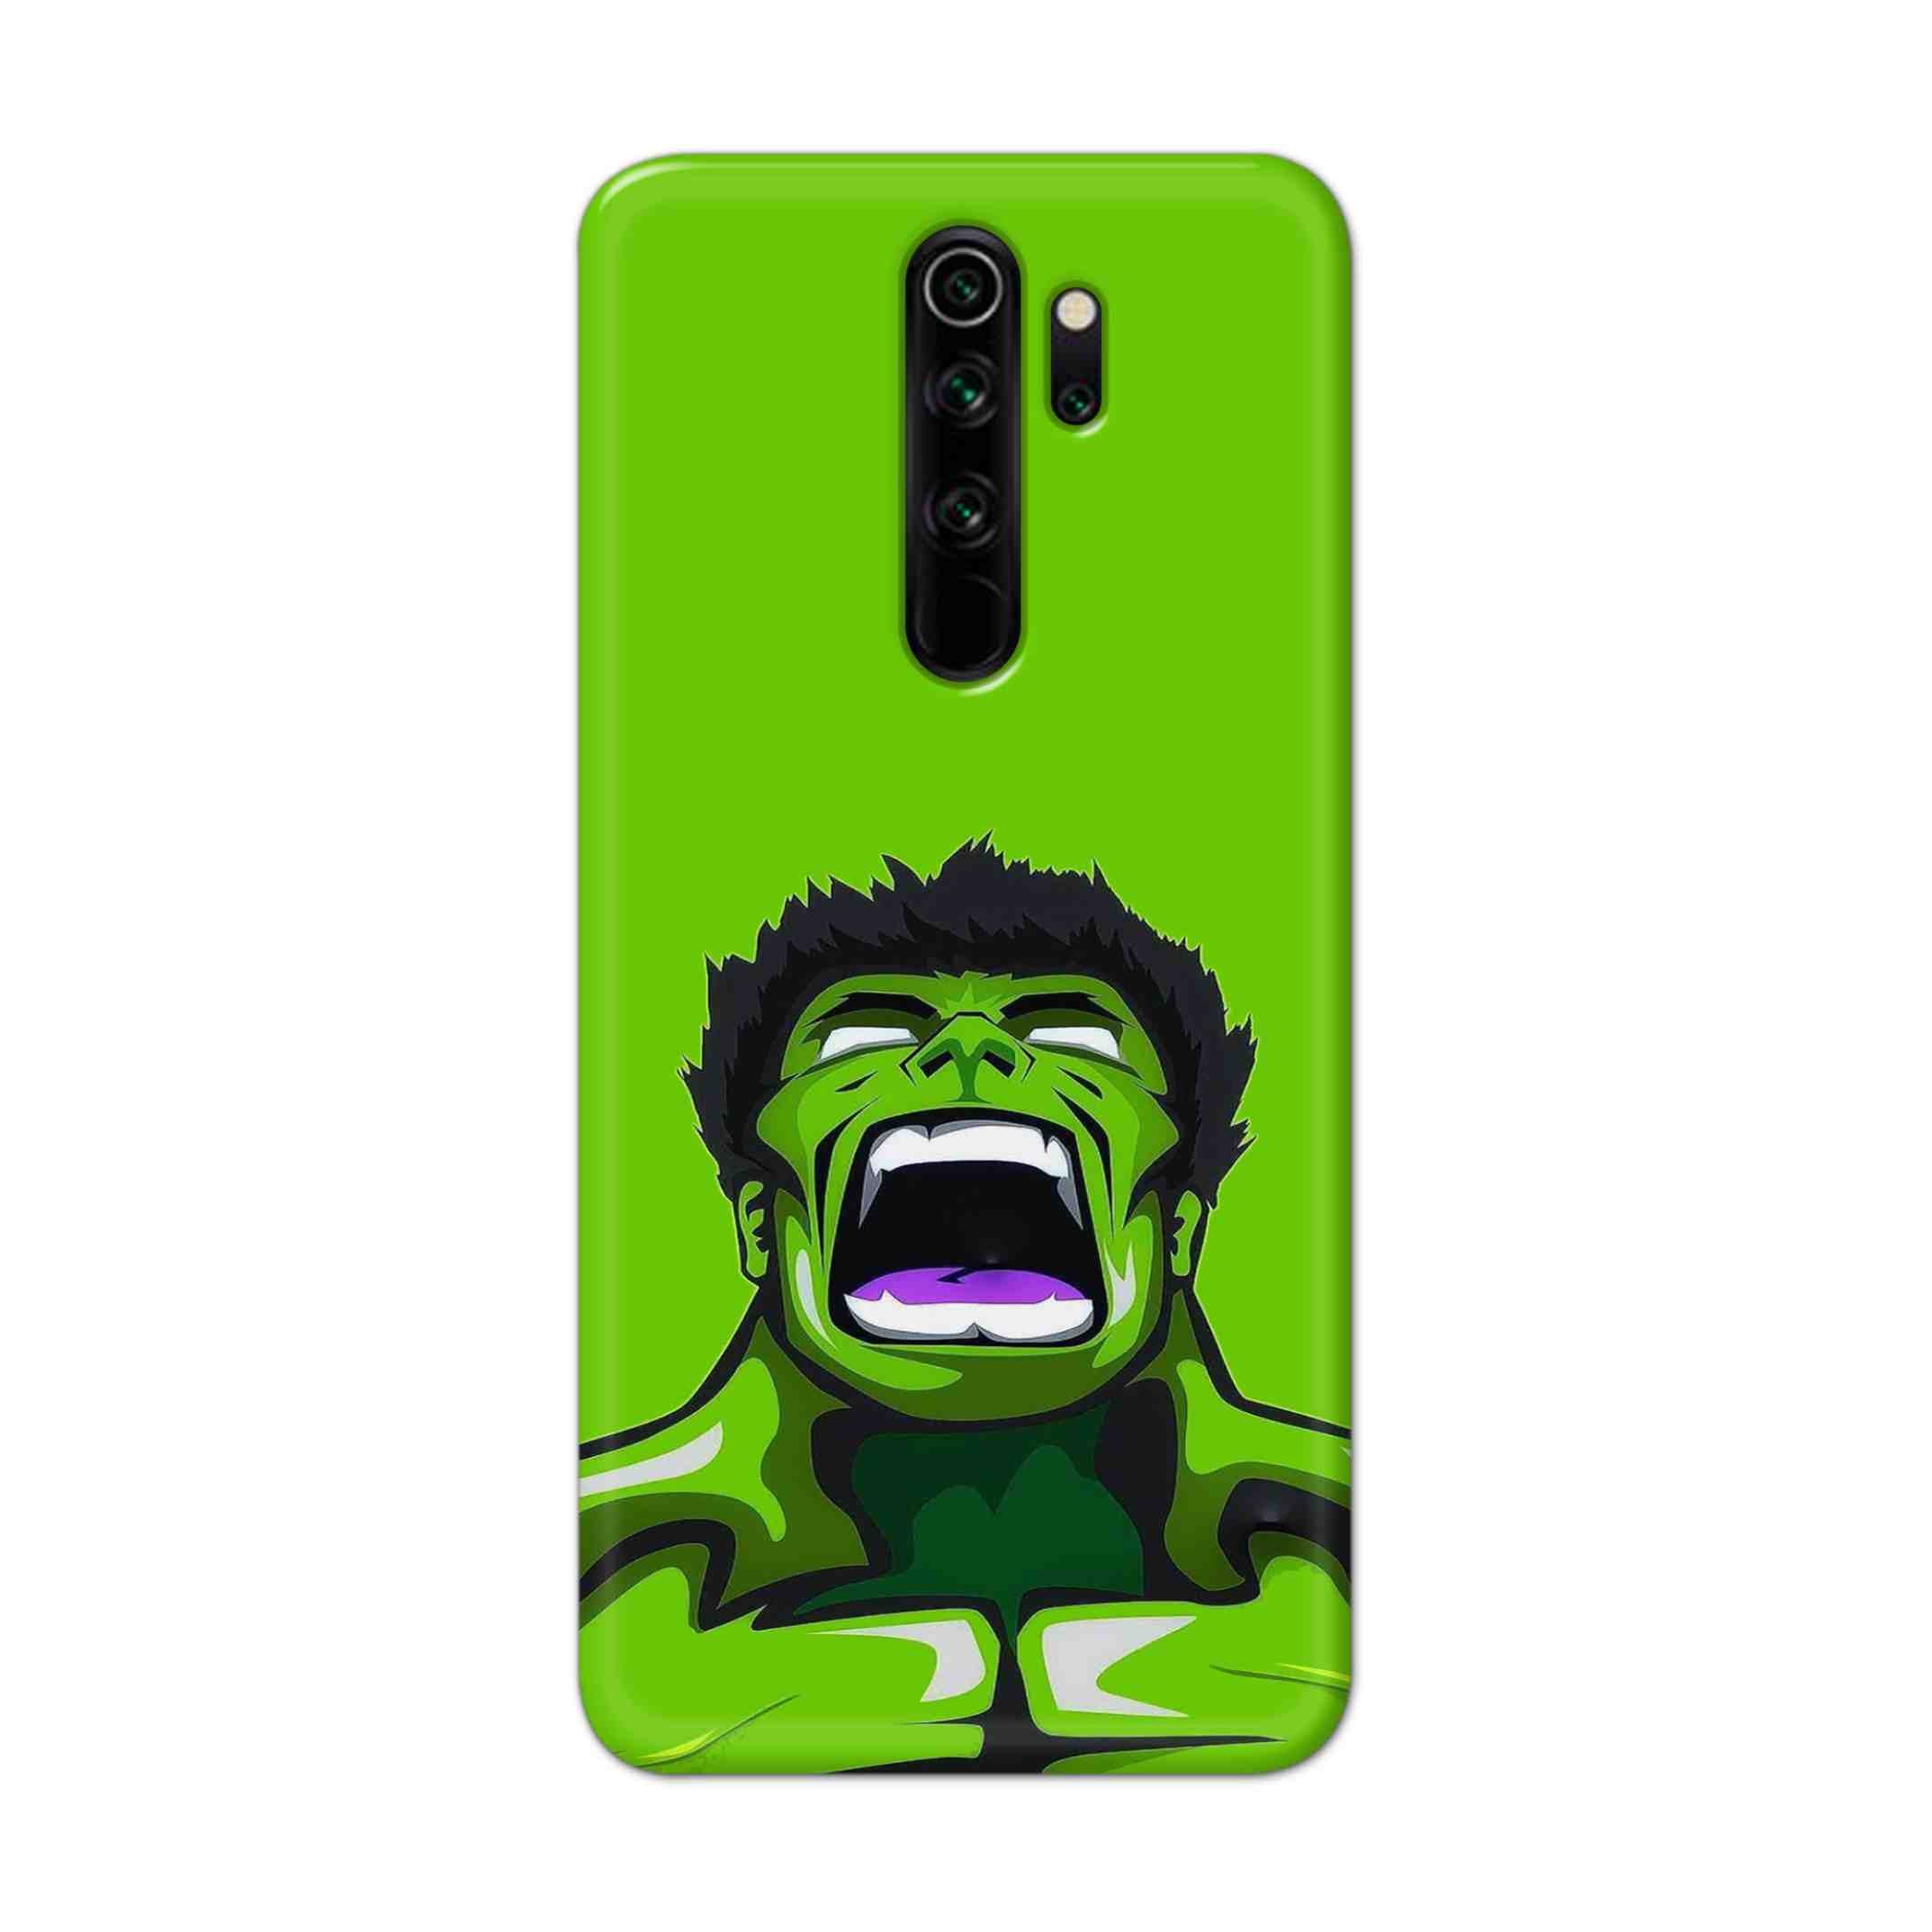 Buy Green Hulk Hard Back Mobile Phone Case Cover For Xiaomi Redmi Note 8 Pro Online